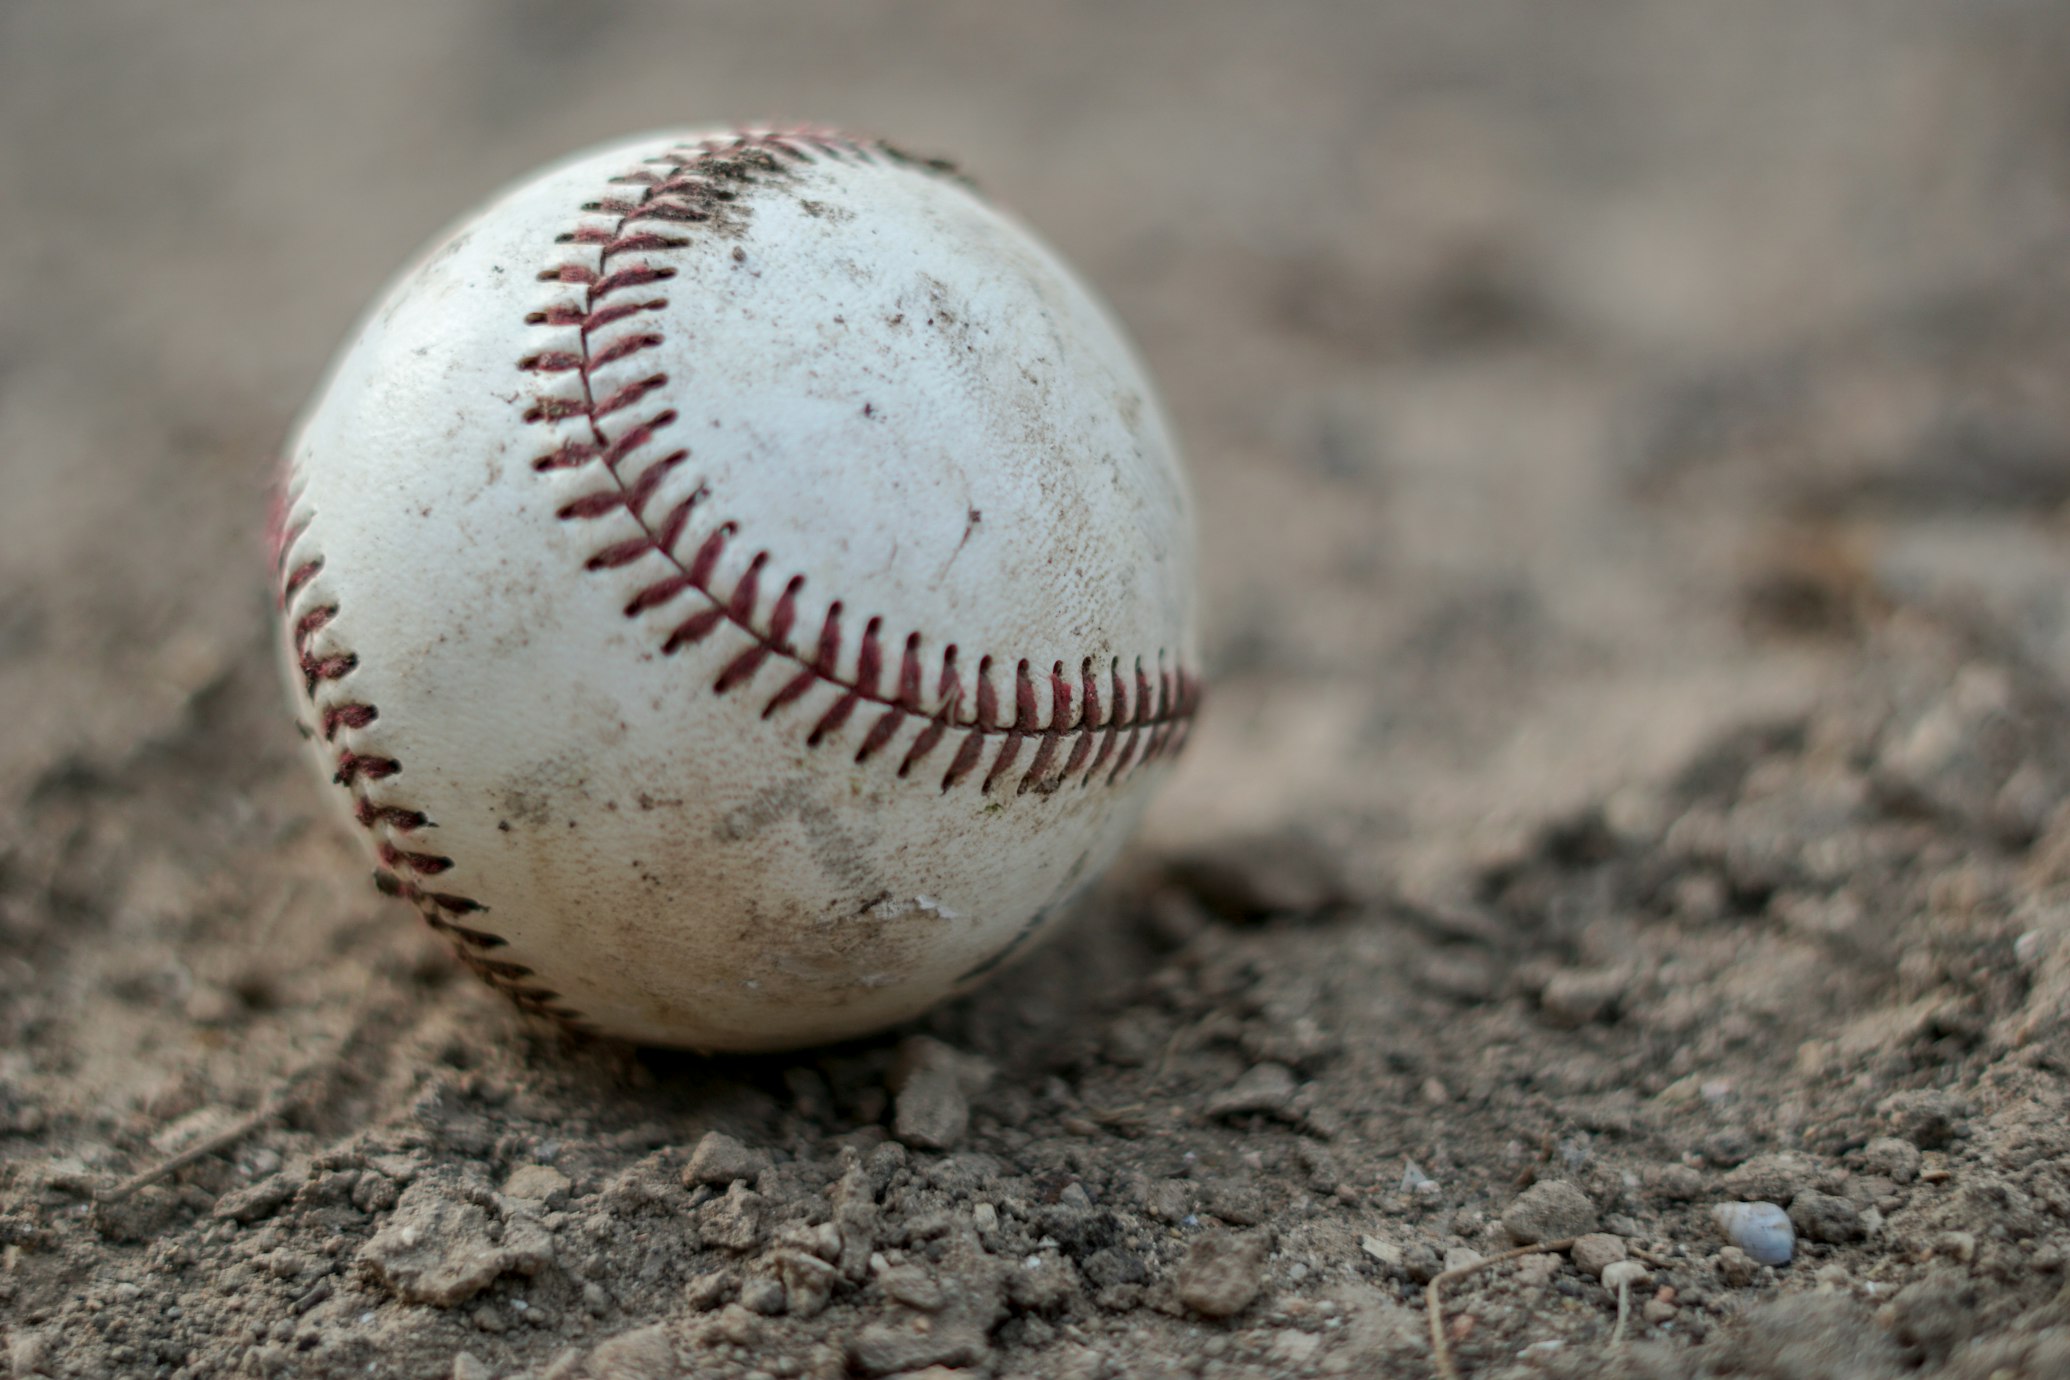 Closeup photo of a baseball sitting in the dirt